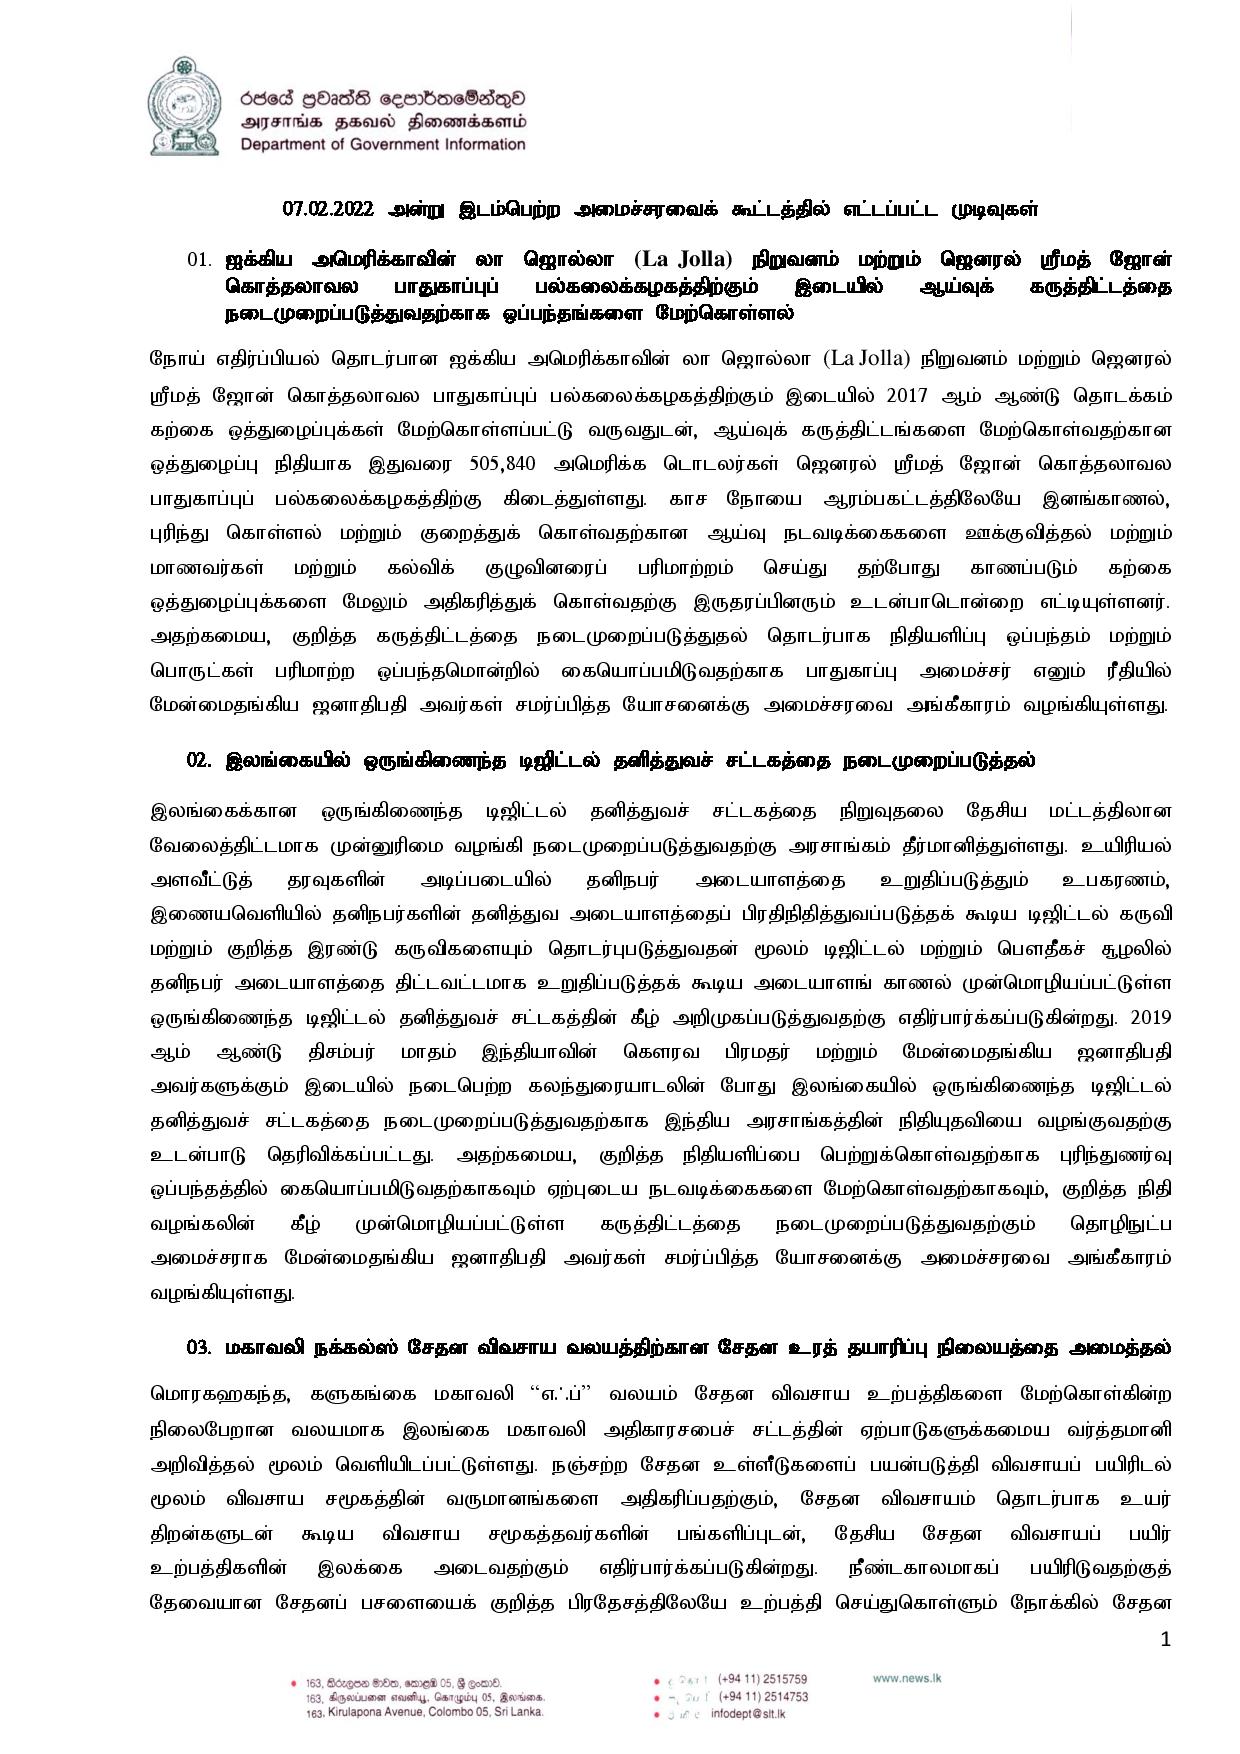 Cabinet Decisions on 07.02.2022 Tamil page 001